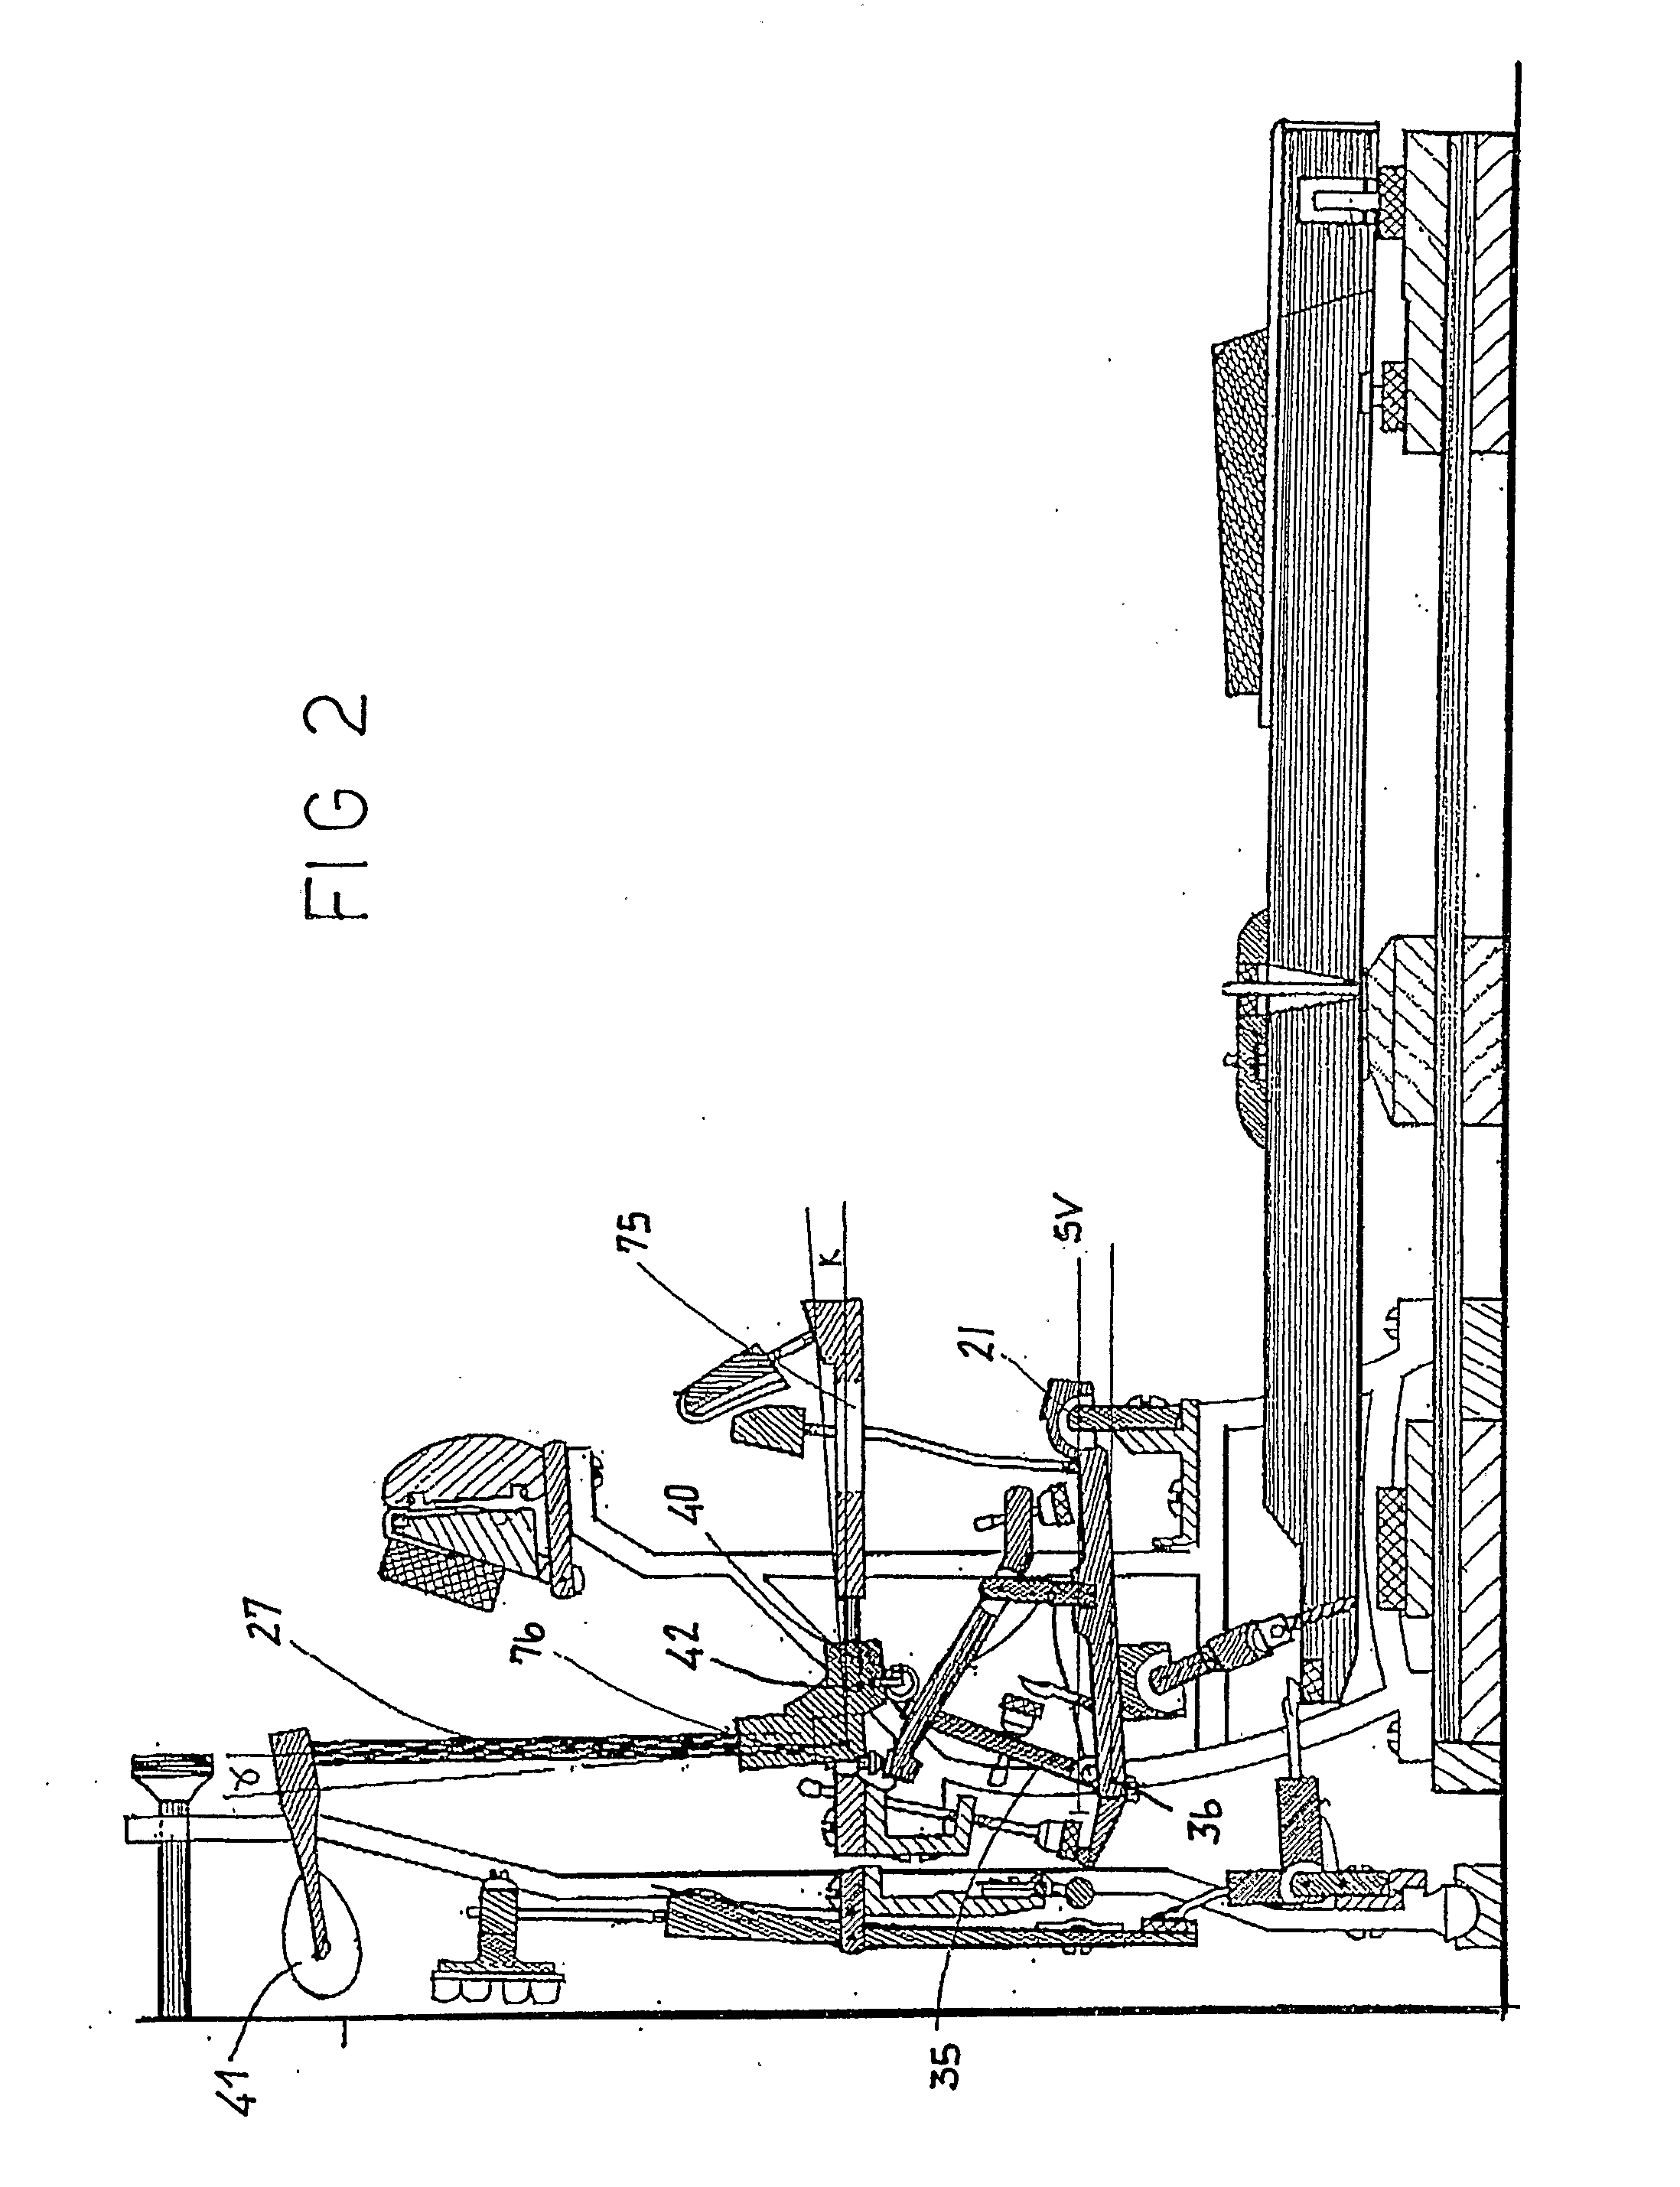 Repetition Action Mechanism for an Upright Piano